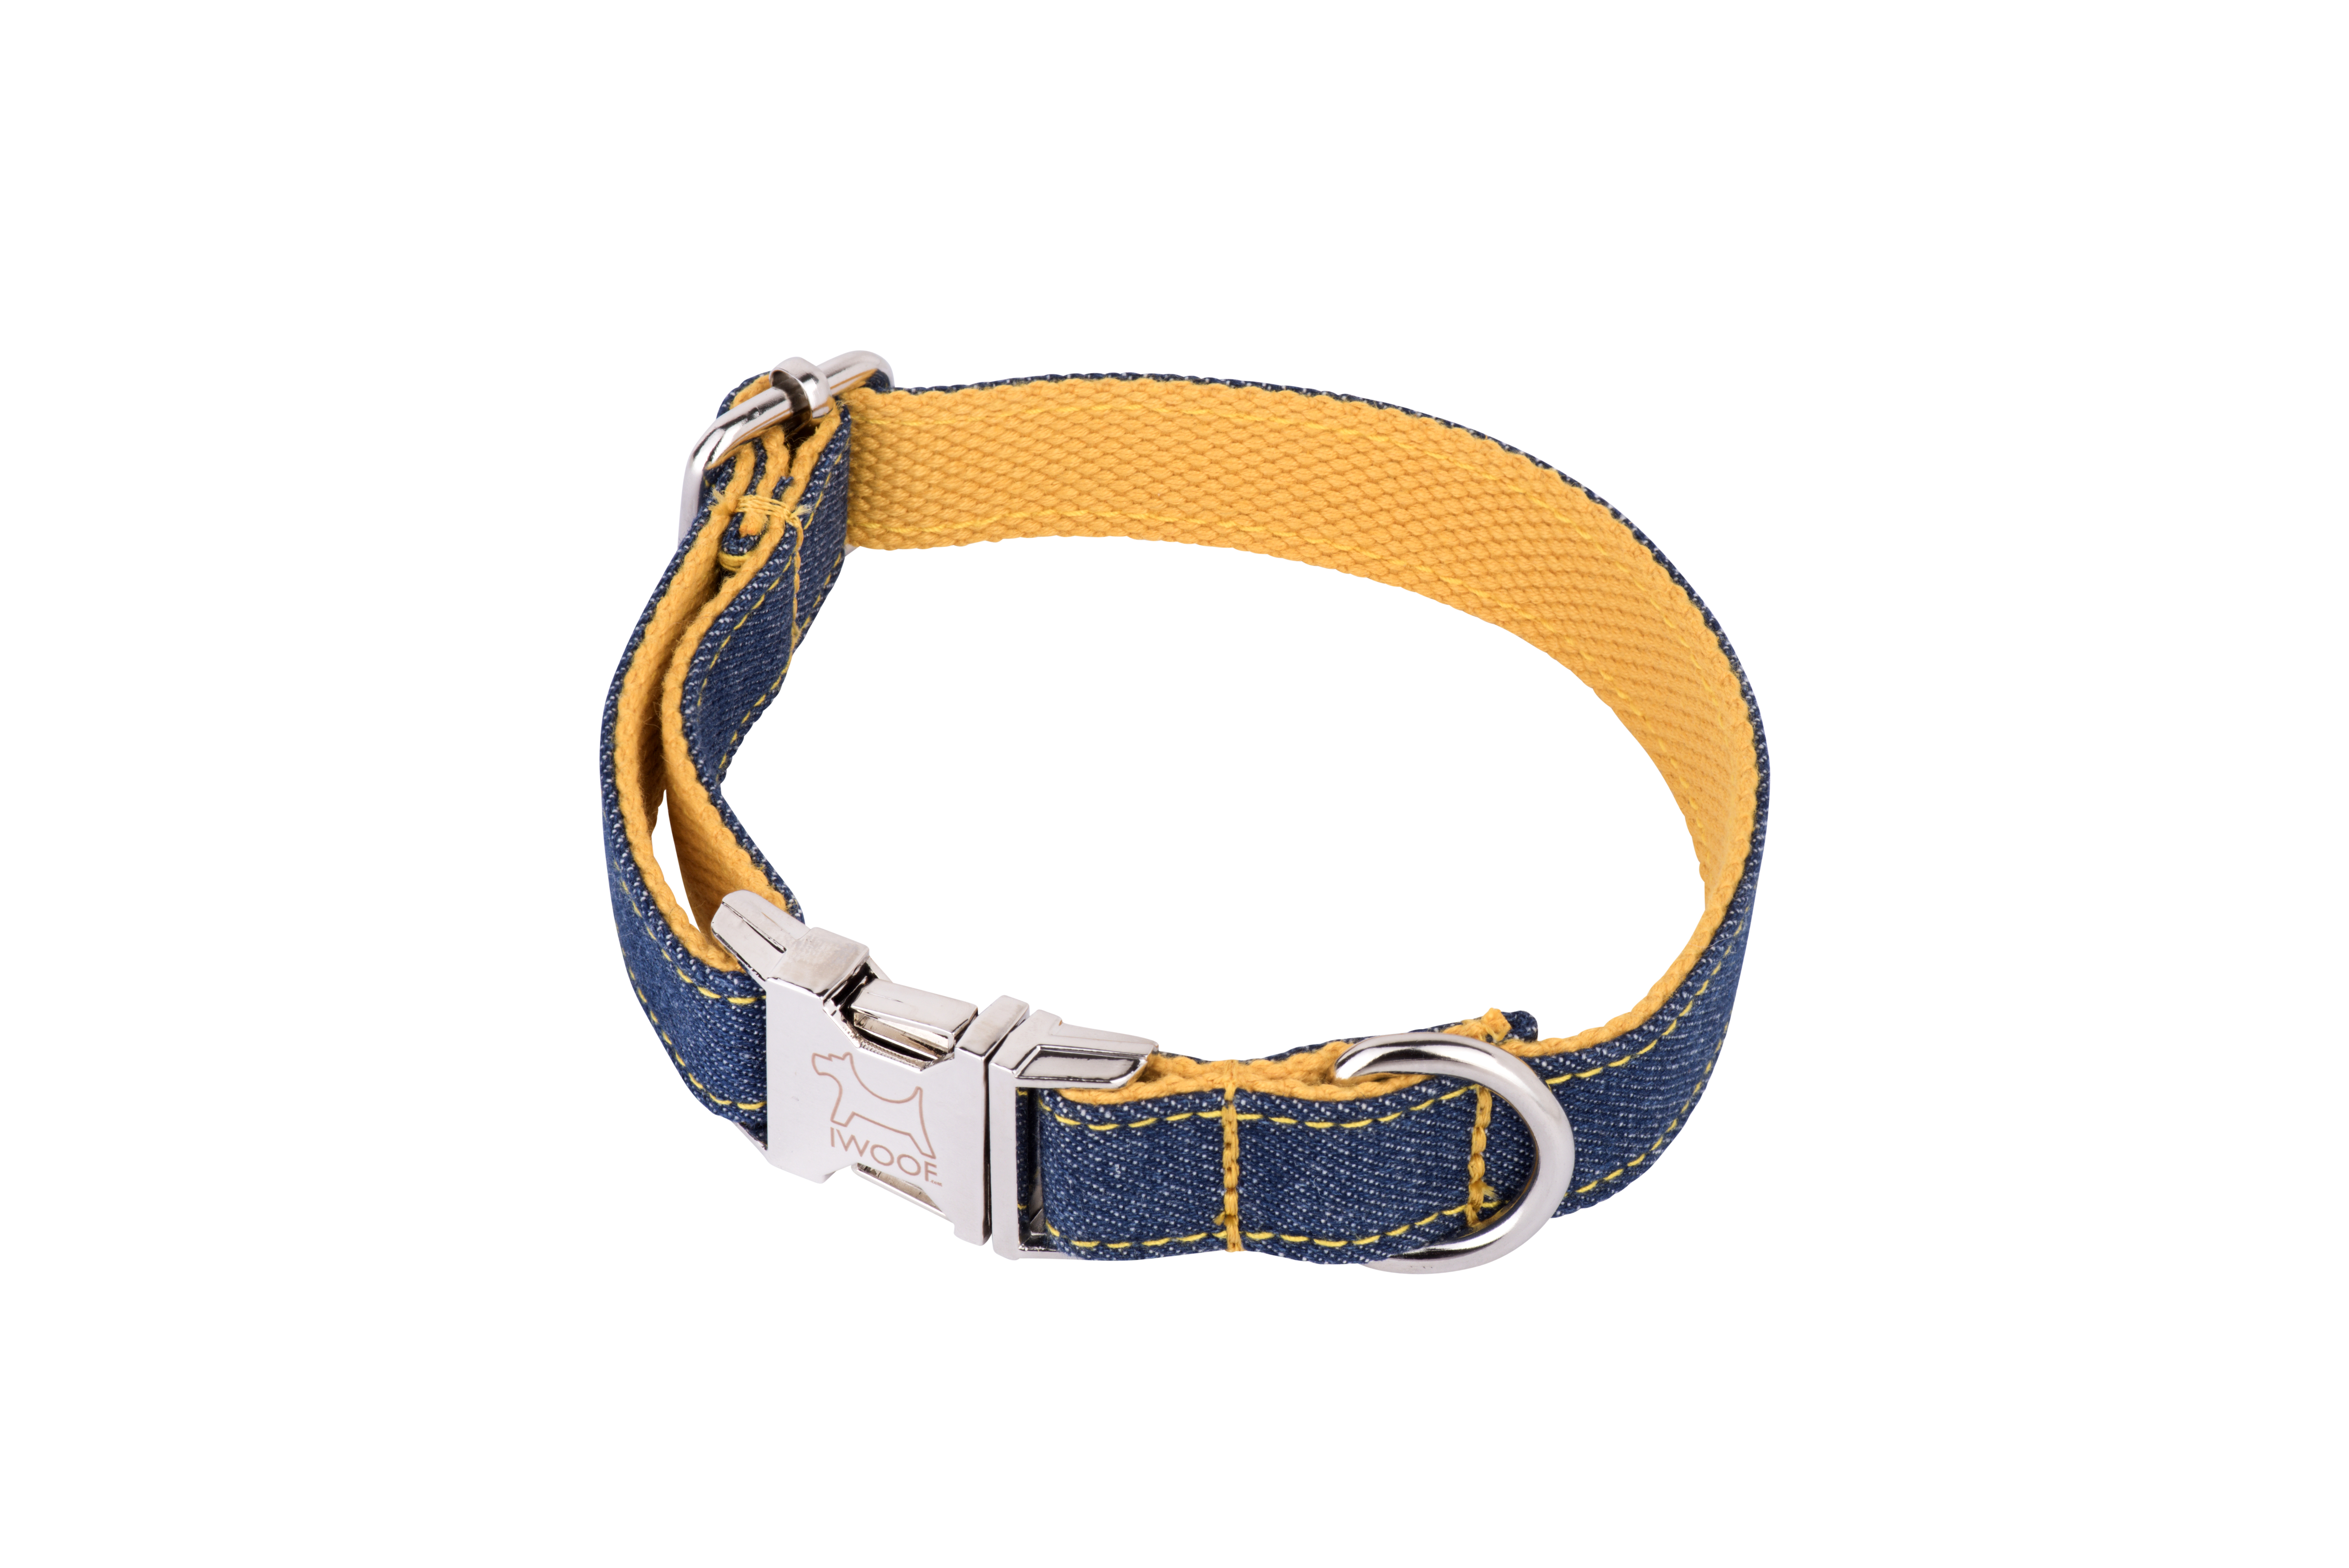 Surfer designer dog collar and dog lead by IWOOF